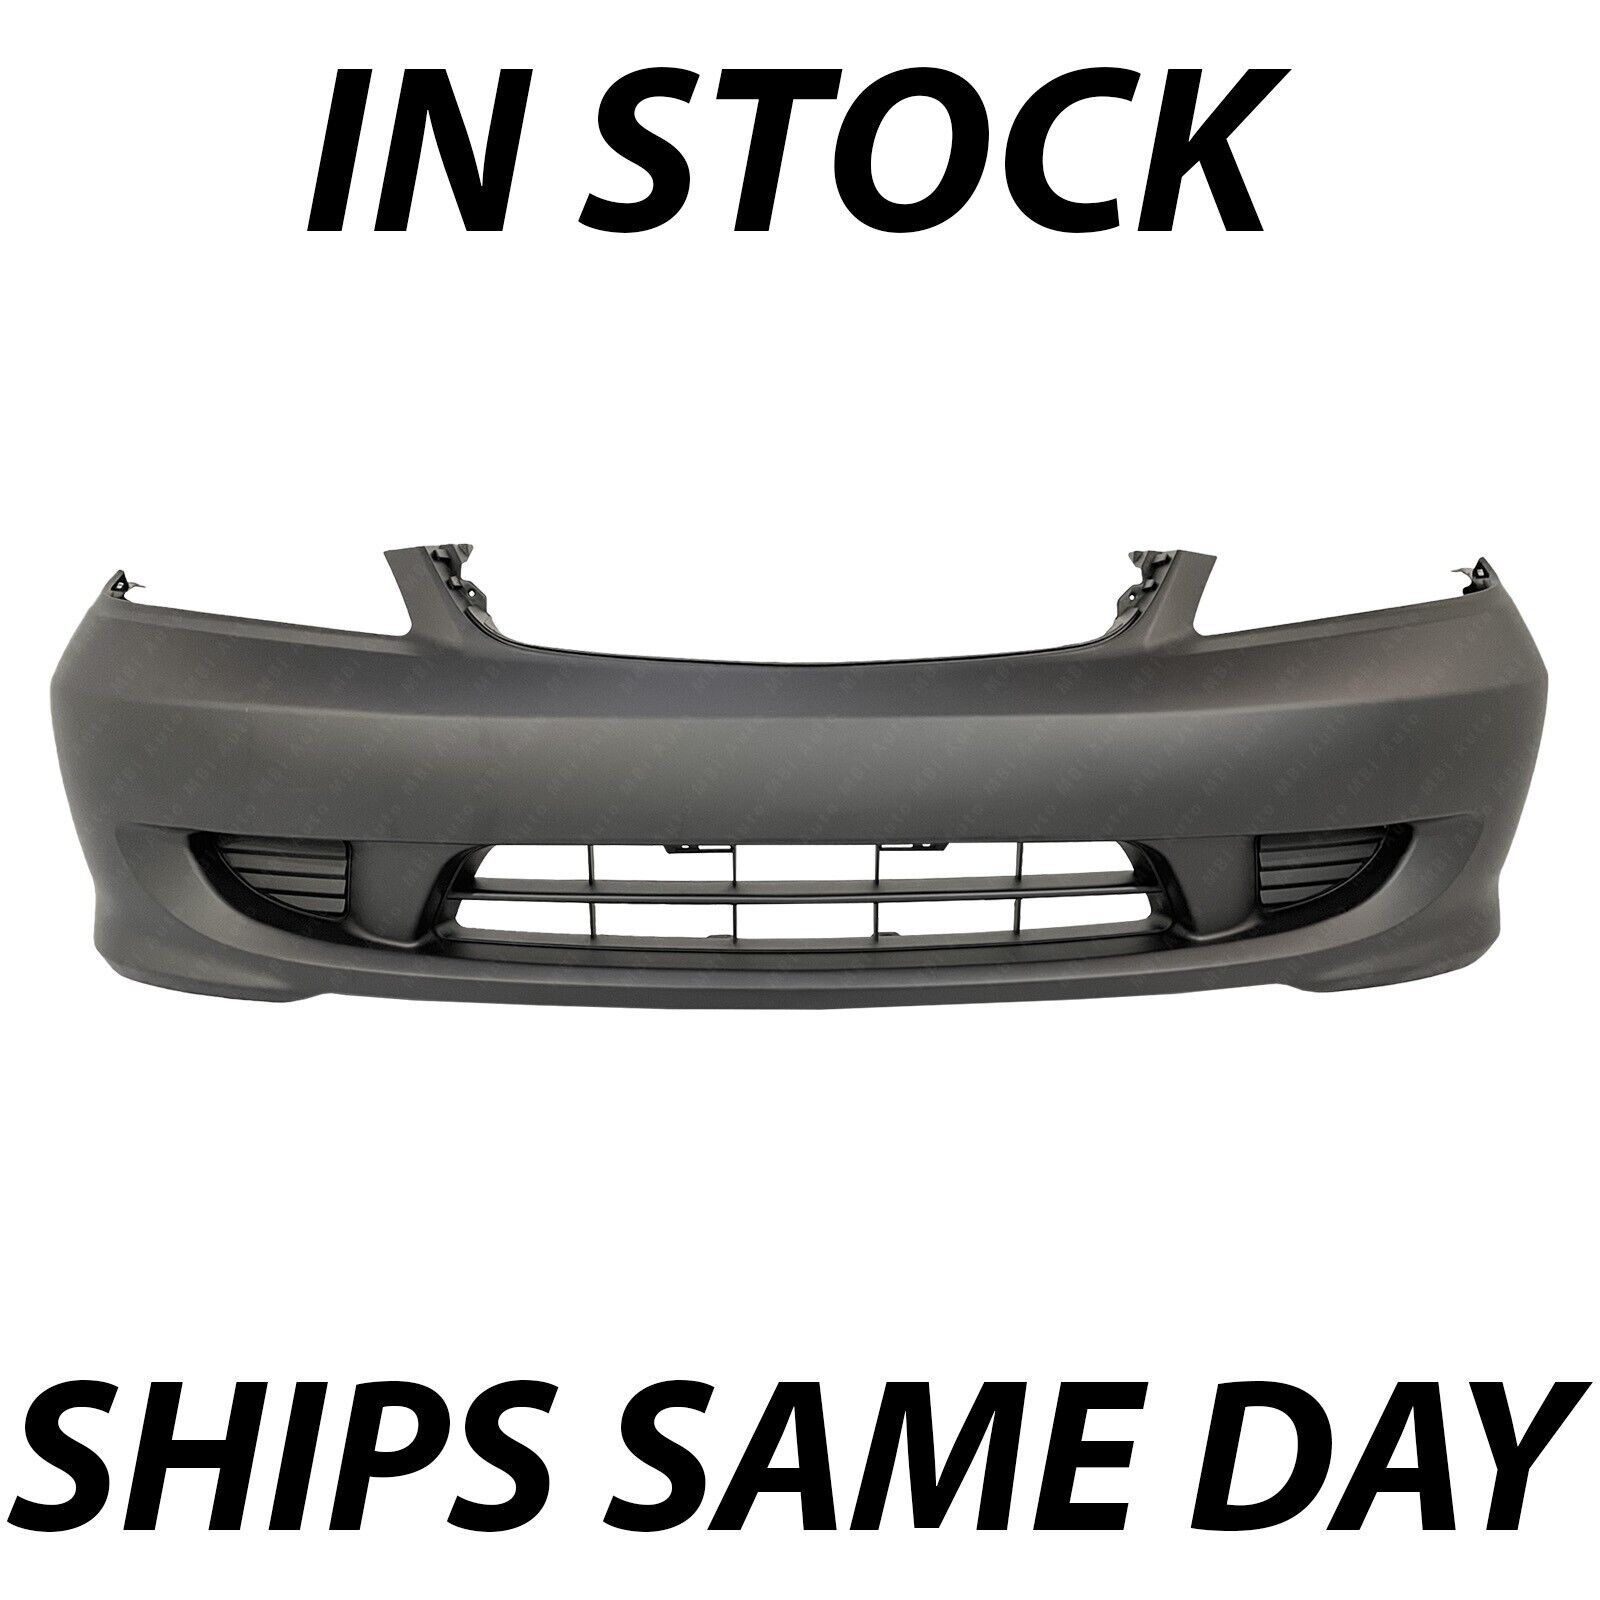 NEW Primered - Front Bumper Cover for 2004 2005 Honda Civic Sedan / Coupe 04 05